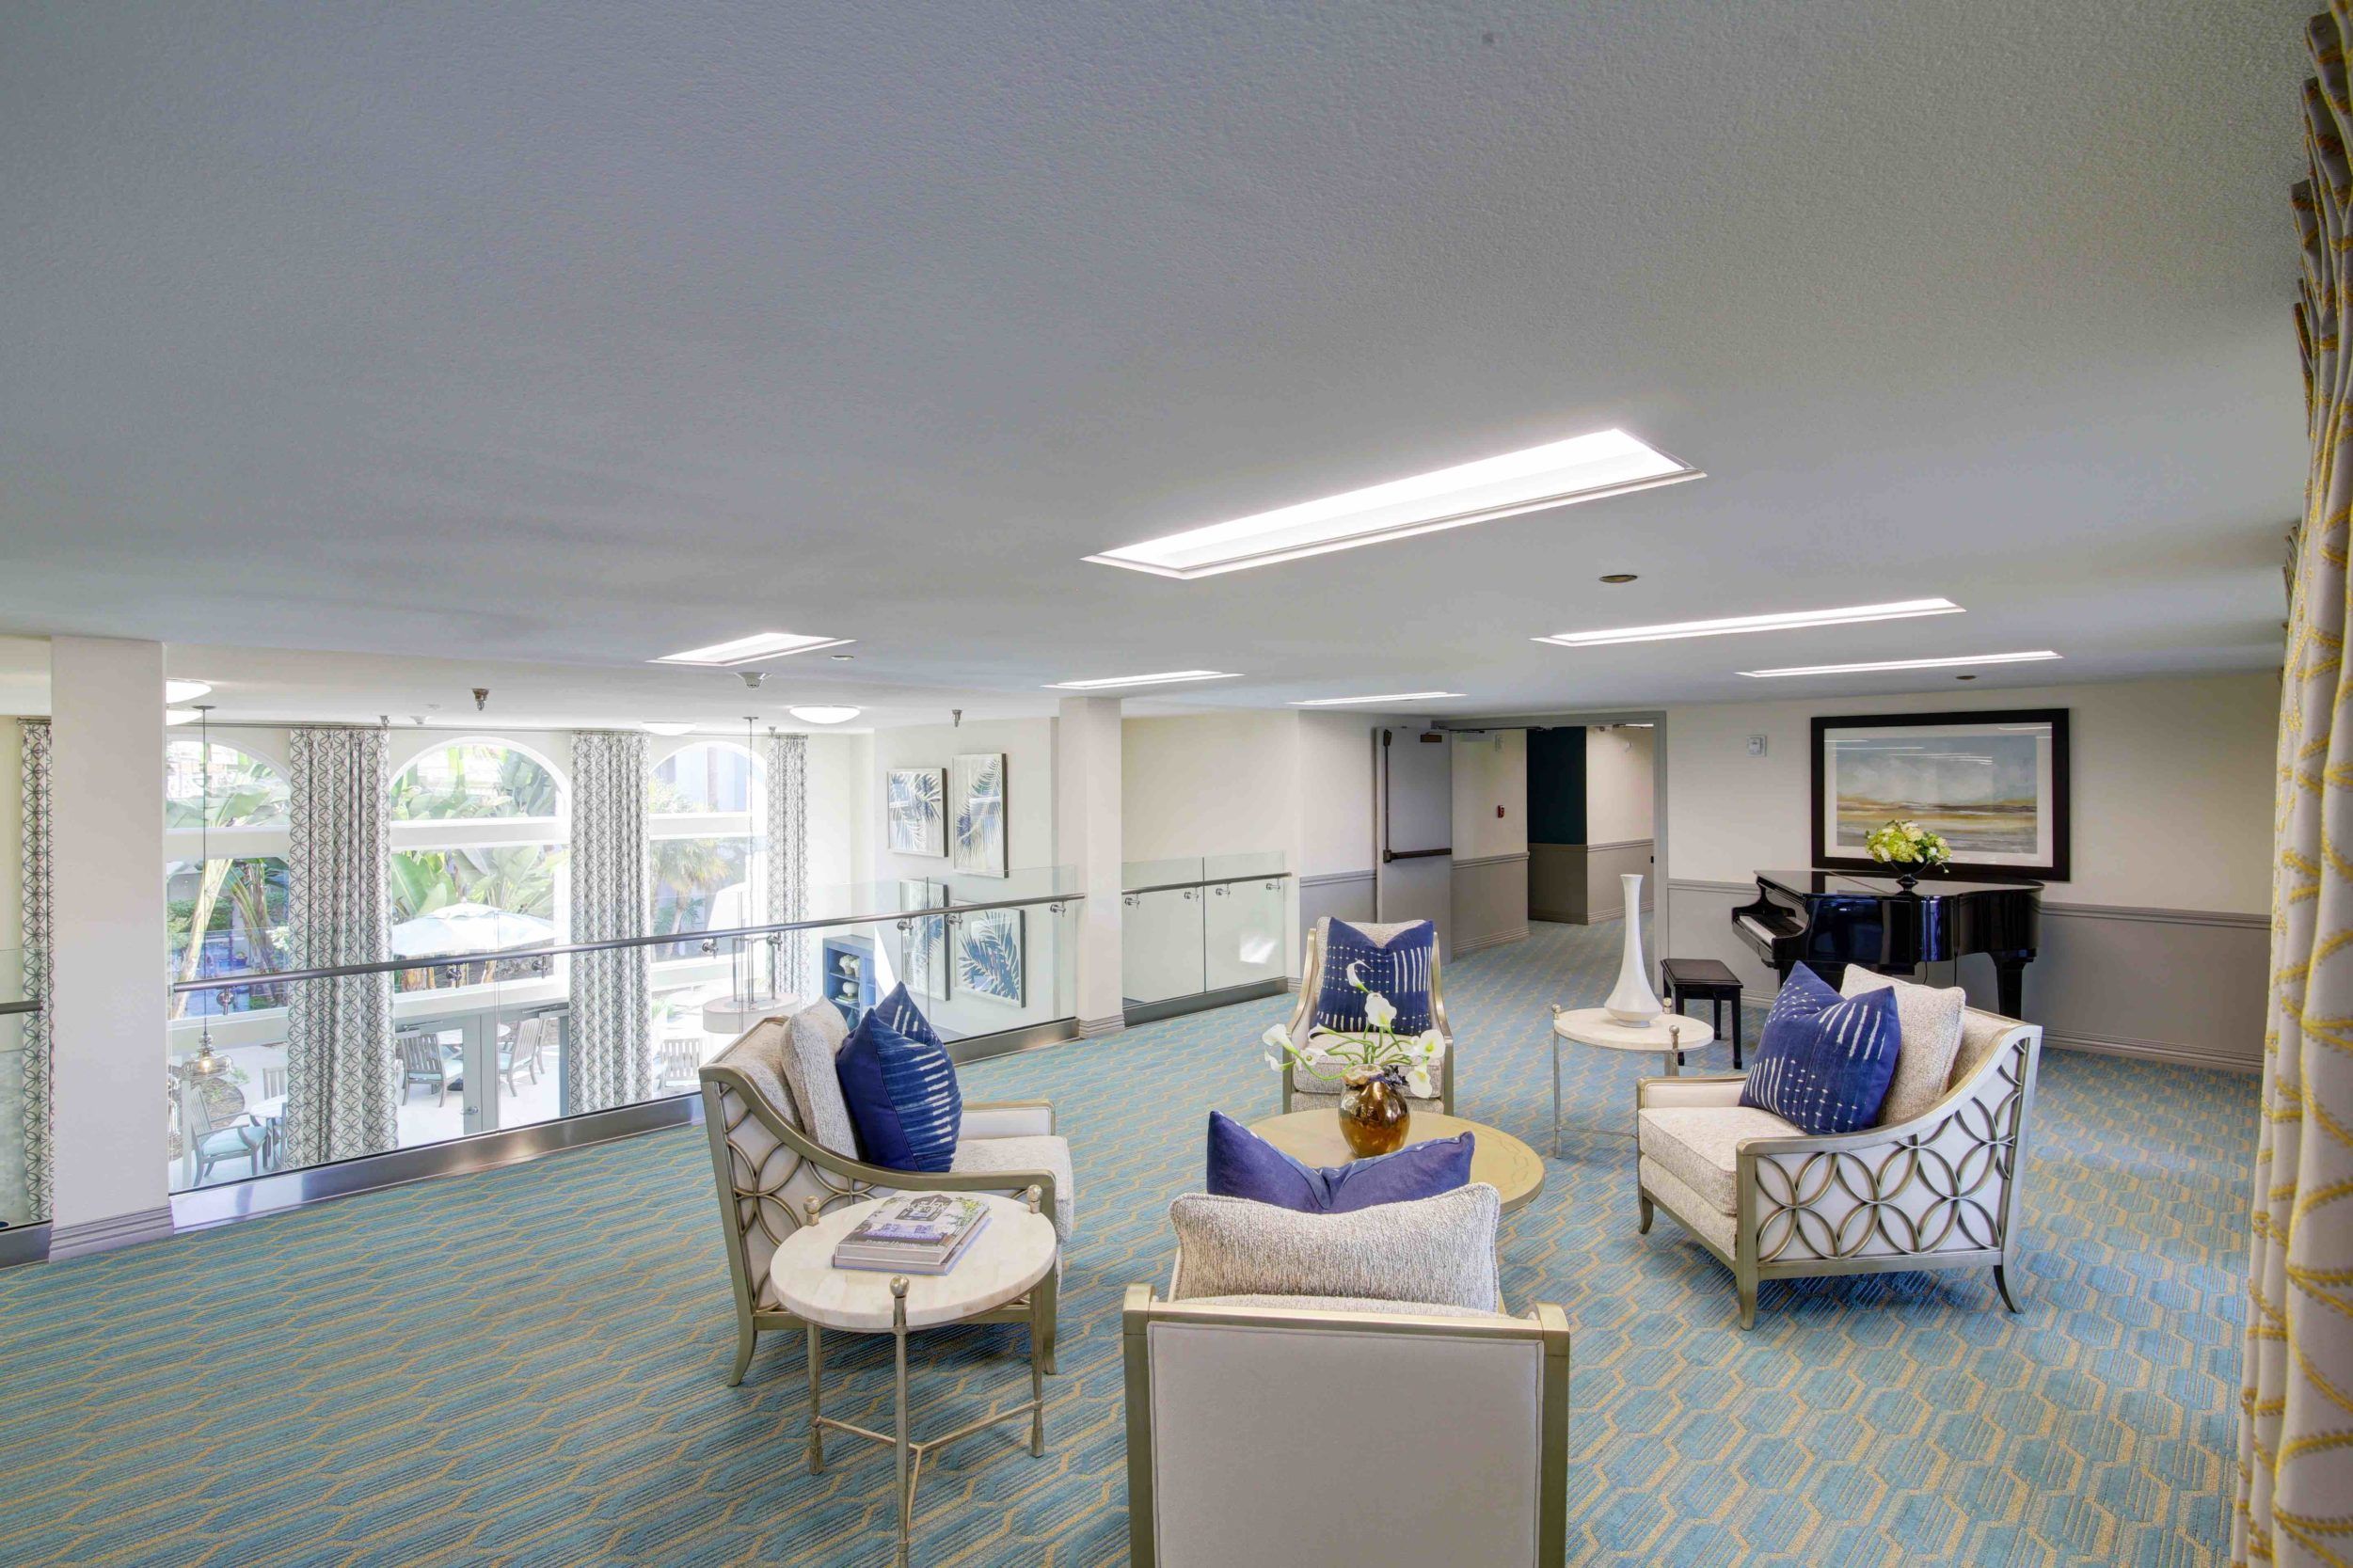 Coastal Heights Senior Living community featuring a welcoming reception room with elegant decor.